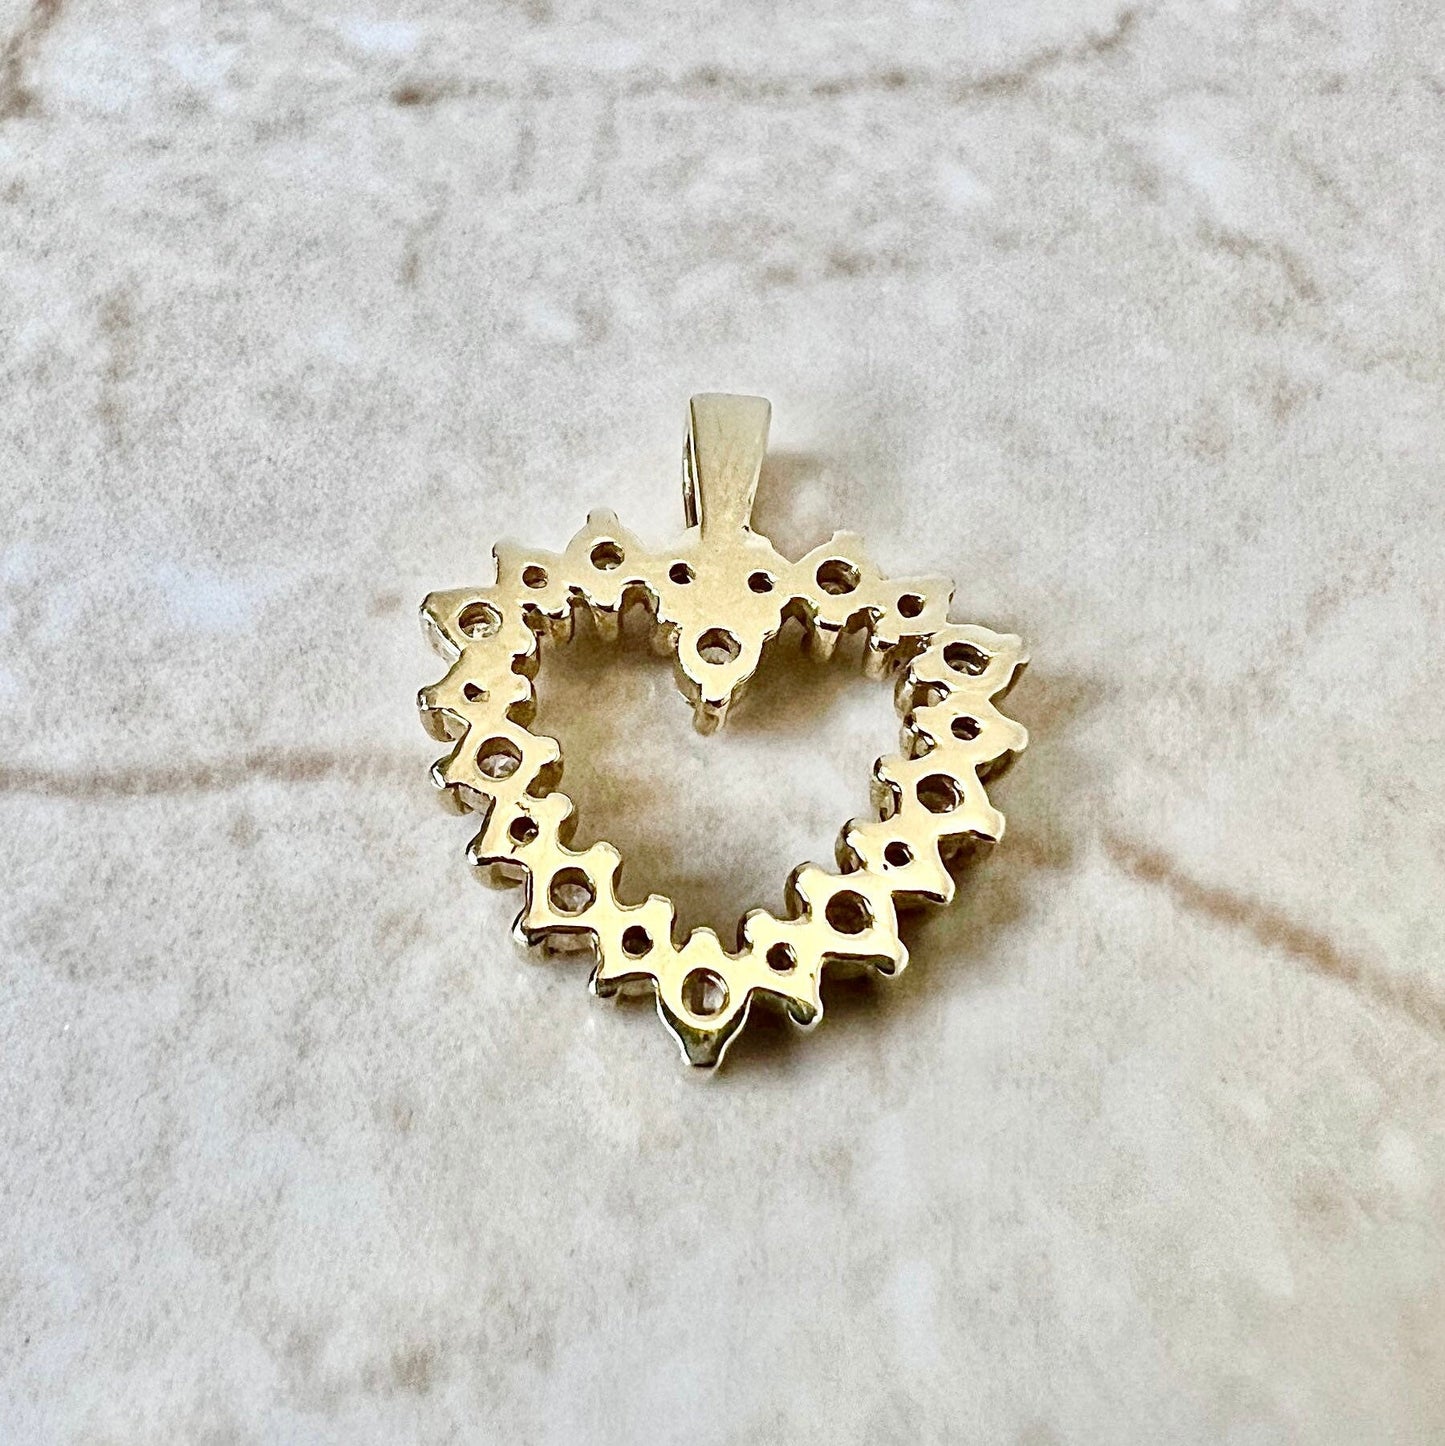 14K Diamond Heart Pendant Necklace 0.50 CTTW - Yellow Gold Diamond Pendant - Heart Necklace - Valentine’s Day Gift For Her - Birthday Gift